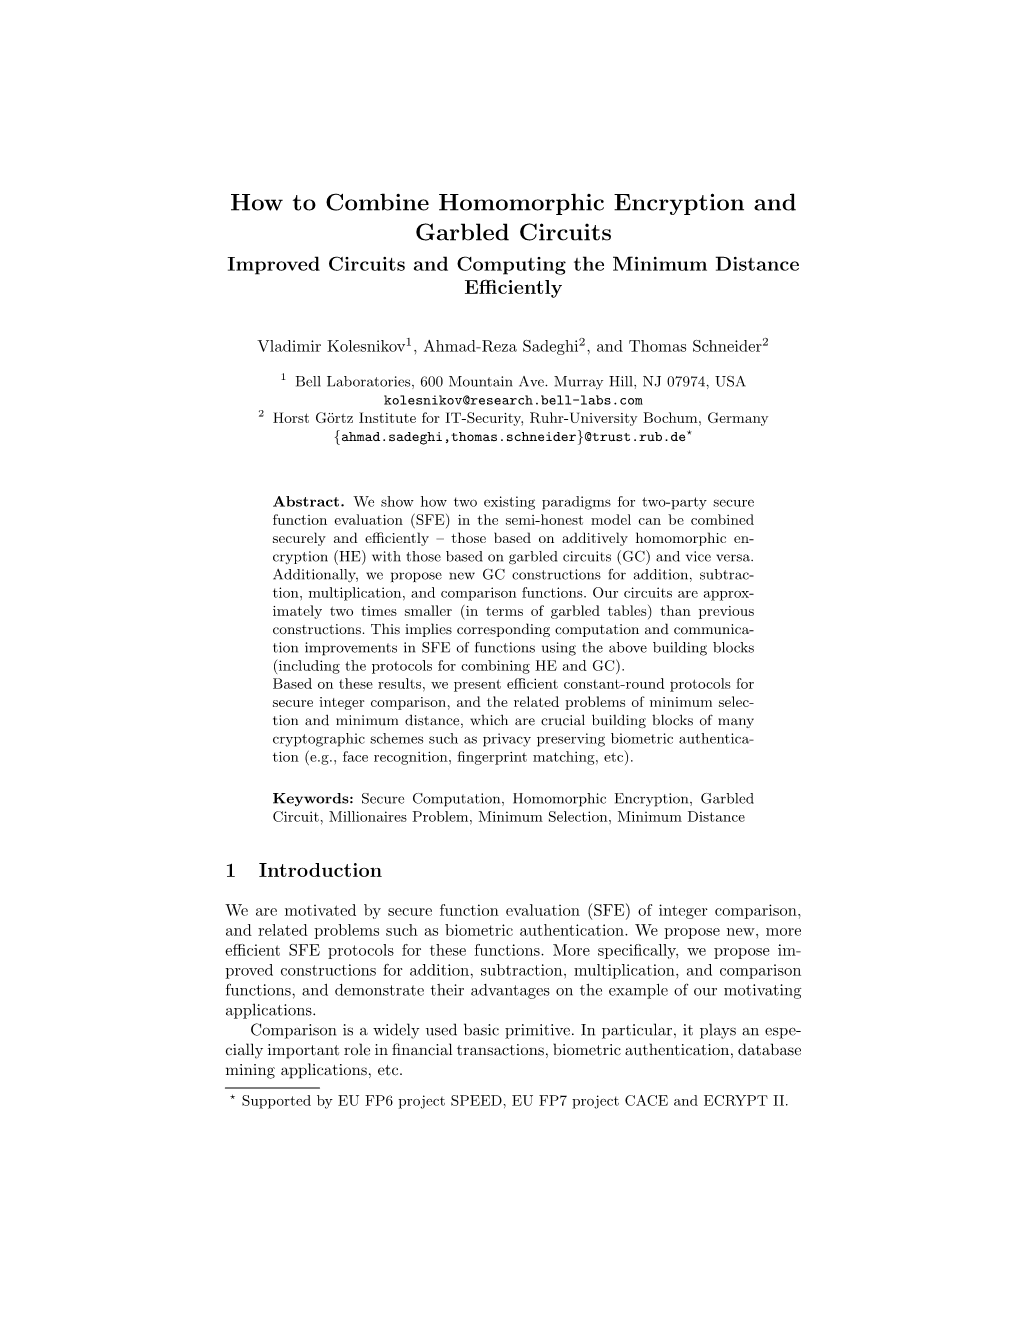 How to Combine Homomorphic Encryption and Garbled Circuits Improved Circuits and Computing the Minimum Distance Eﬃciently